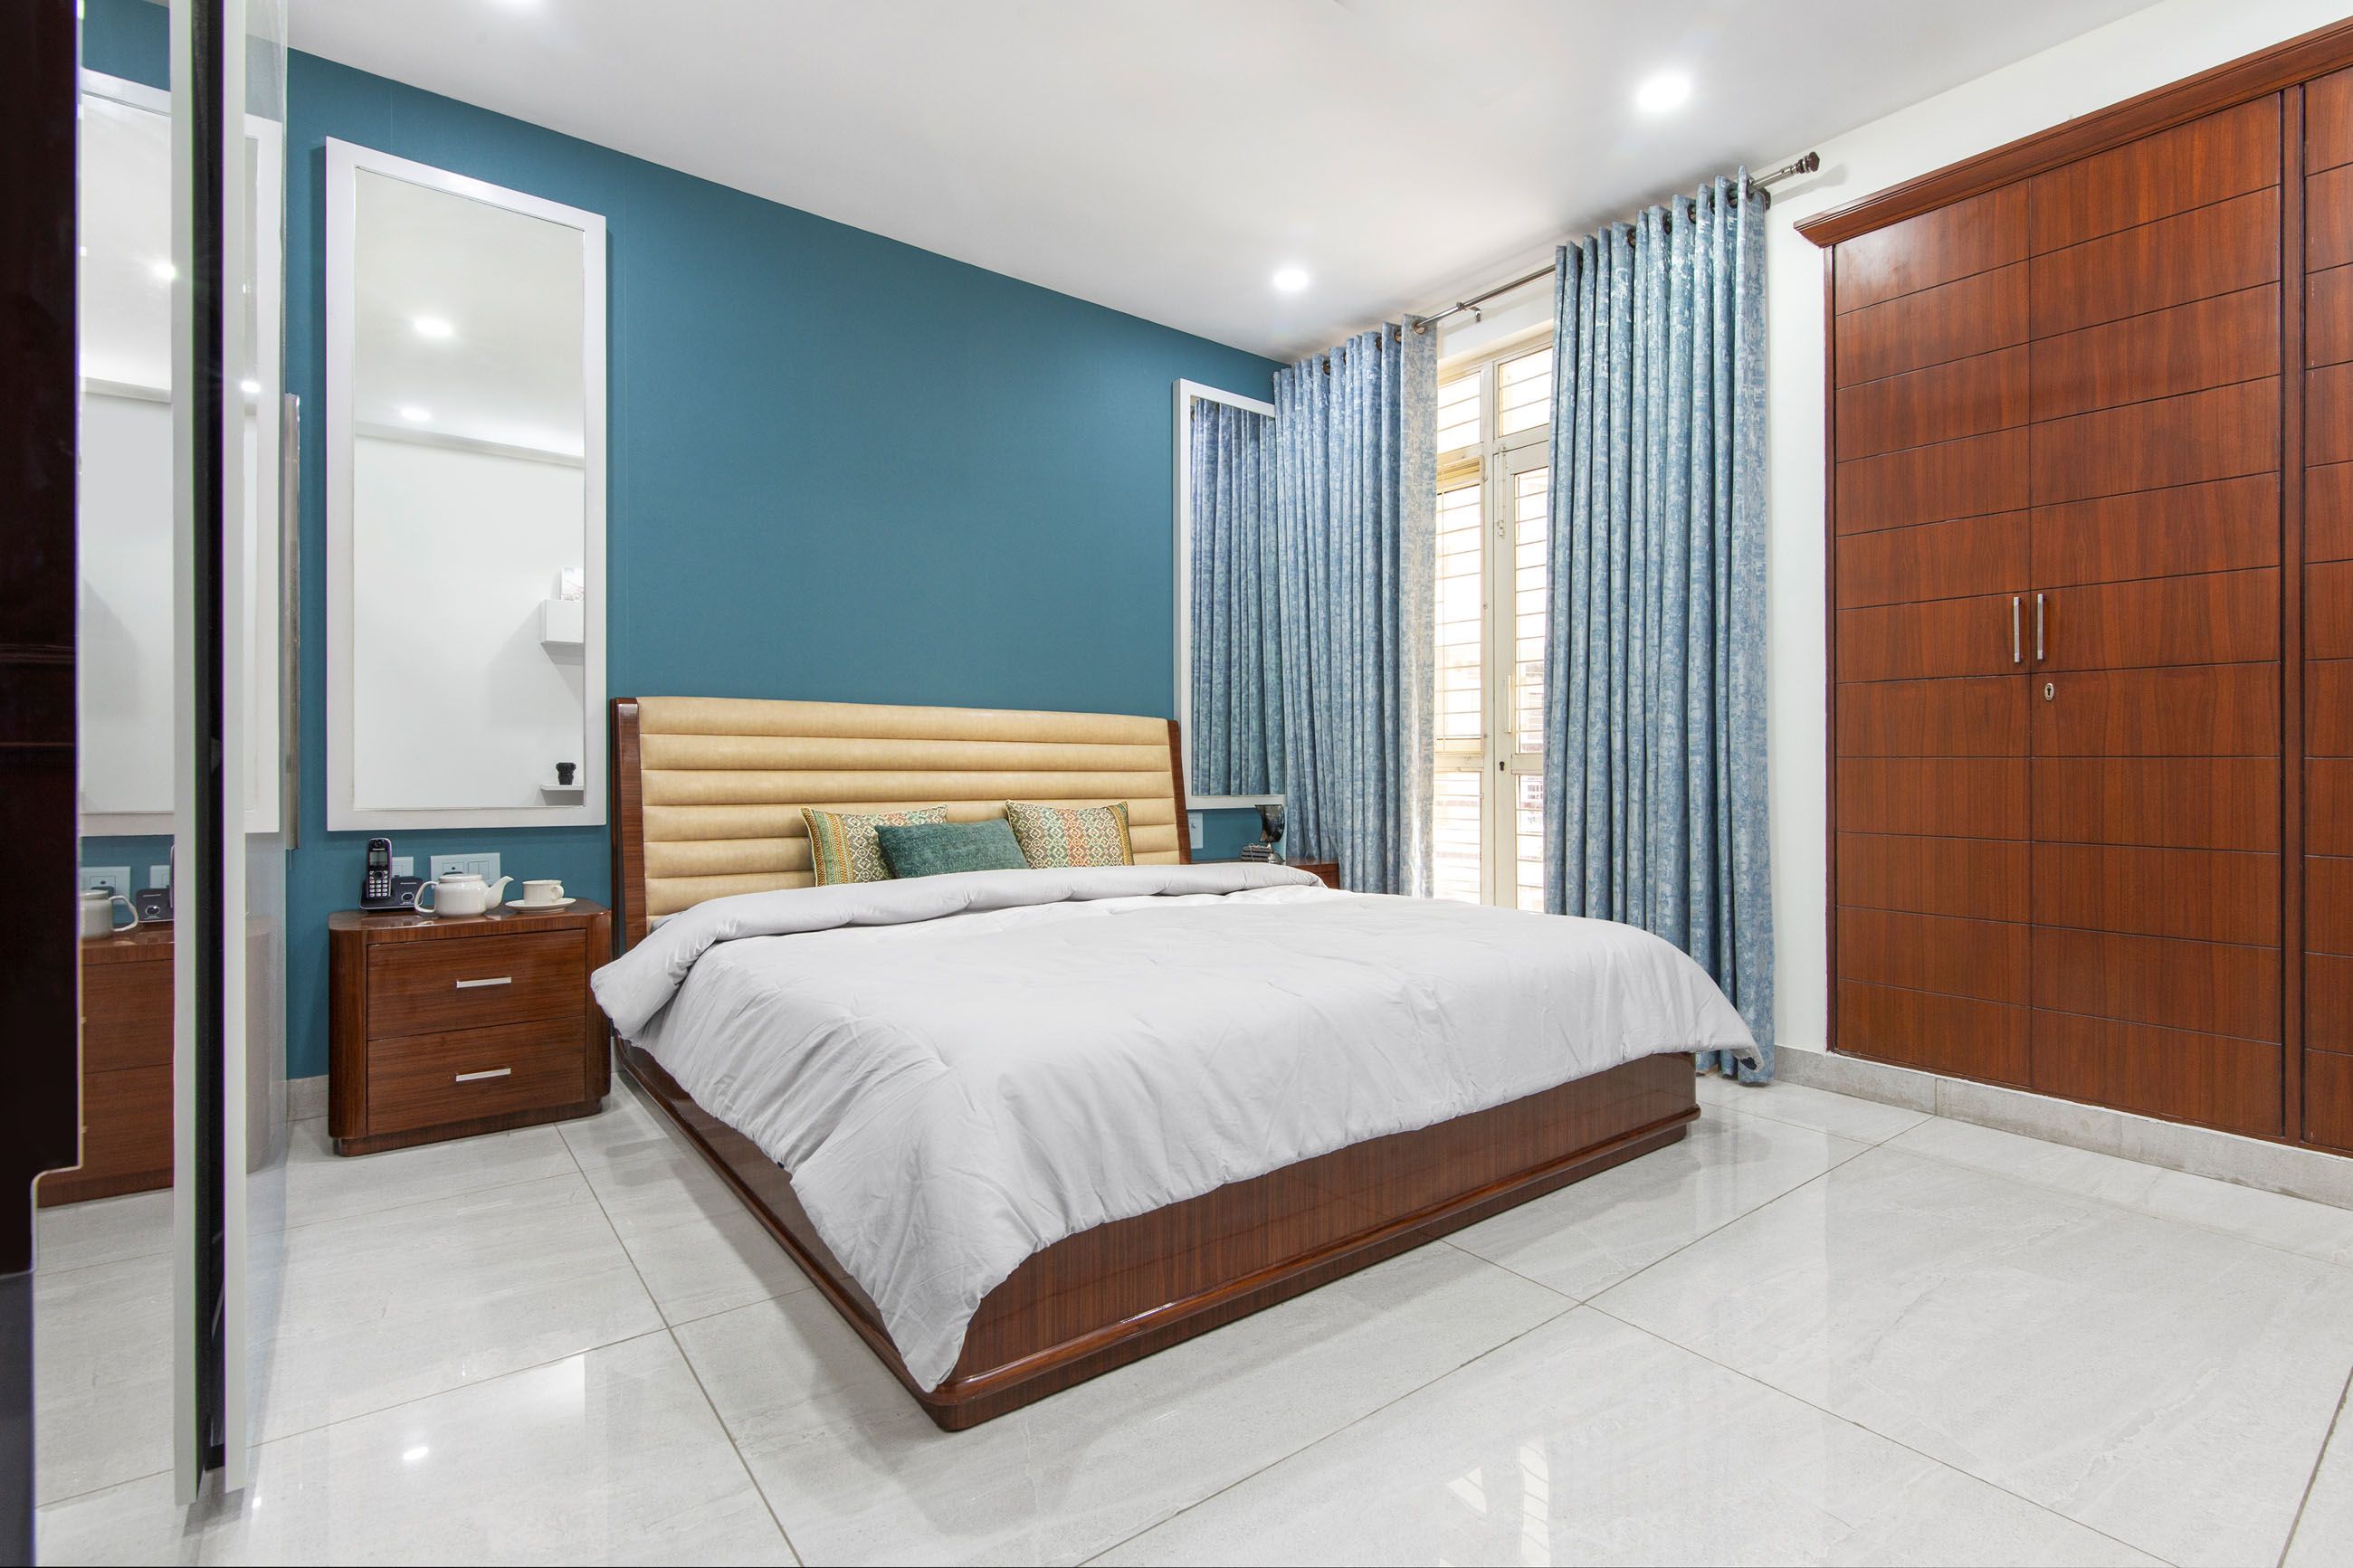 Modern Guest Bedroom Design With King-Size Bed And Blue Accent Wall